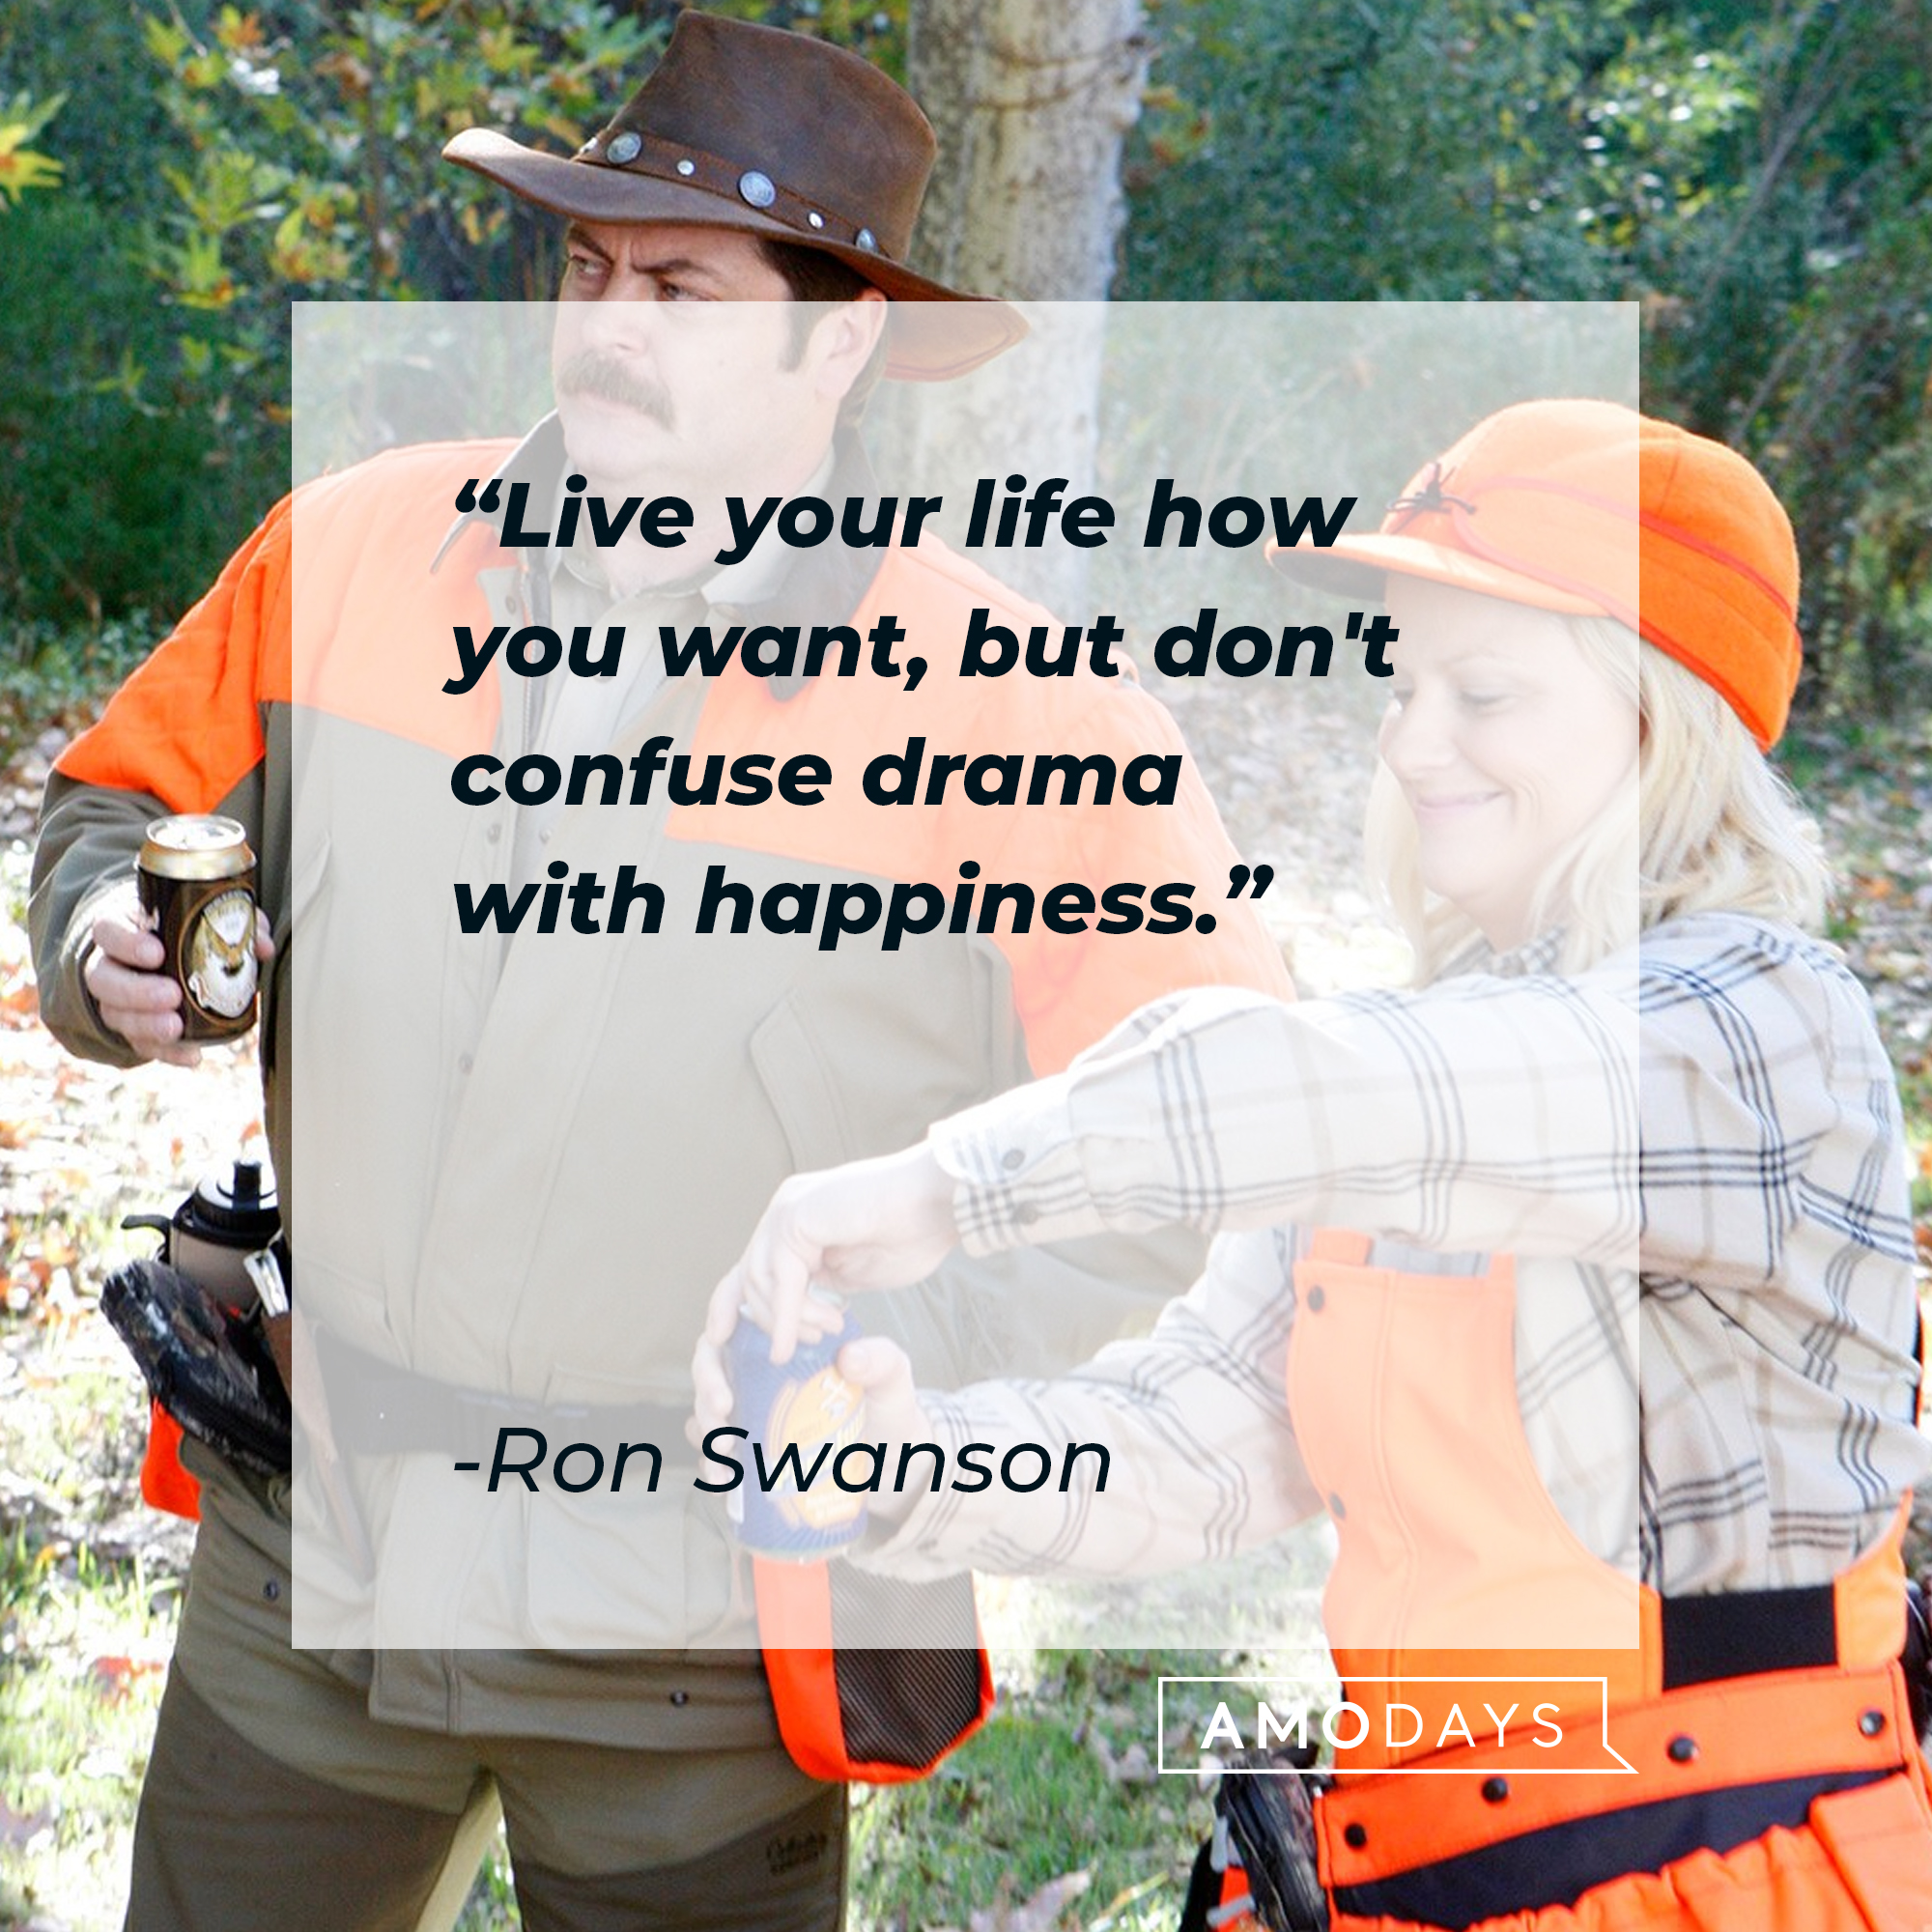 Ron Swanson’s quote: "Live your life how you want, but don't confuse drama with happiness." | Image: Facebook.com/parksandrecreation